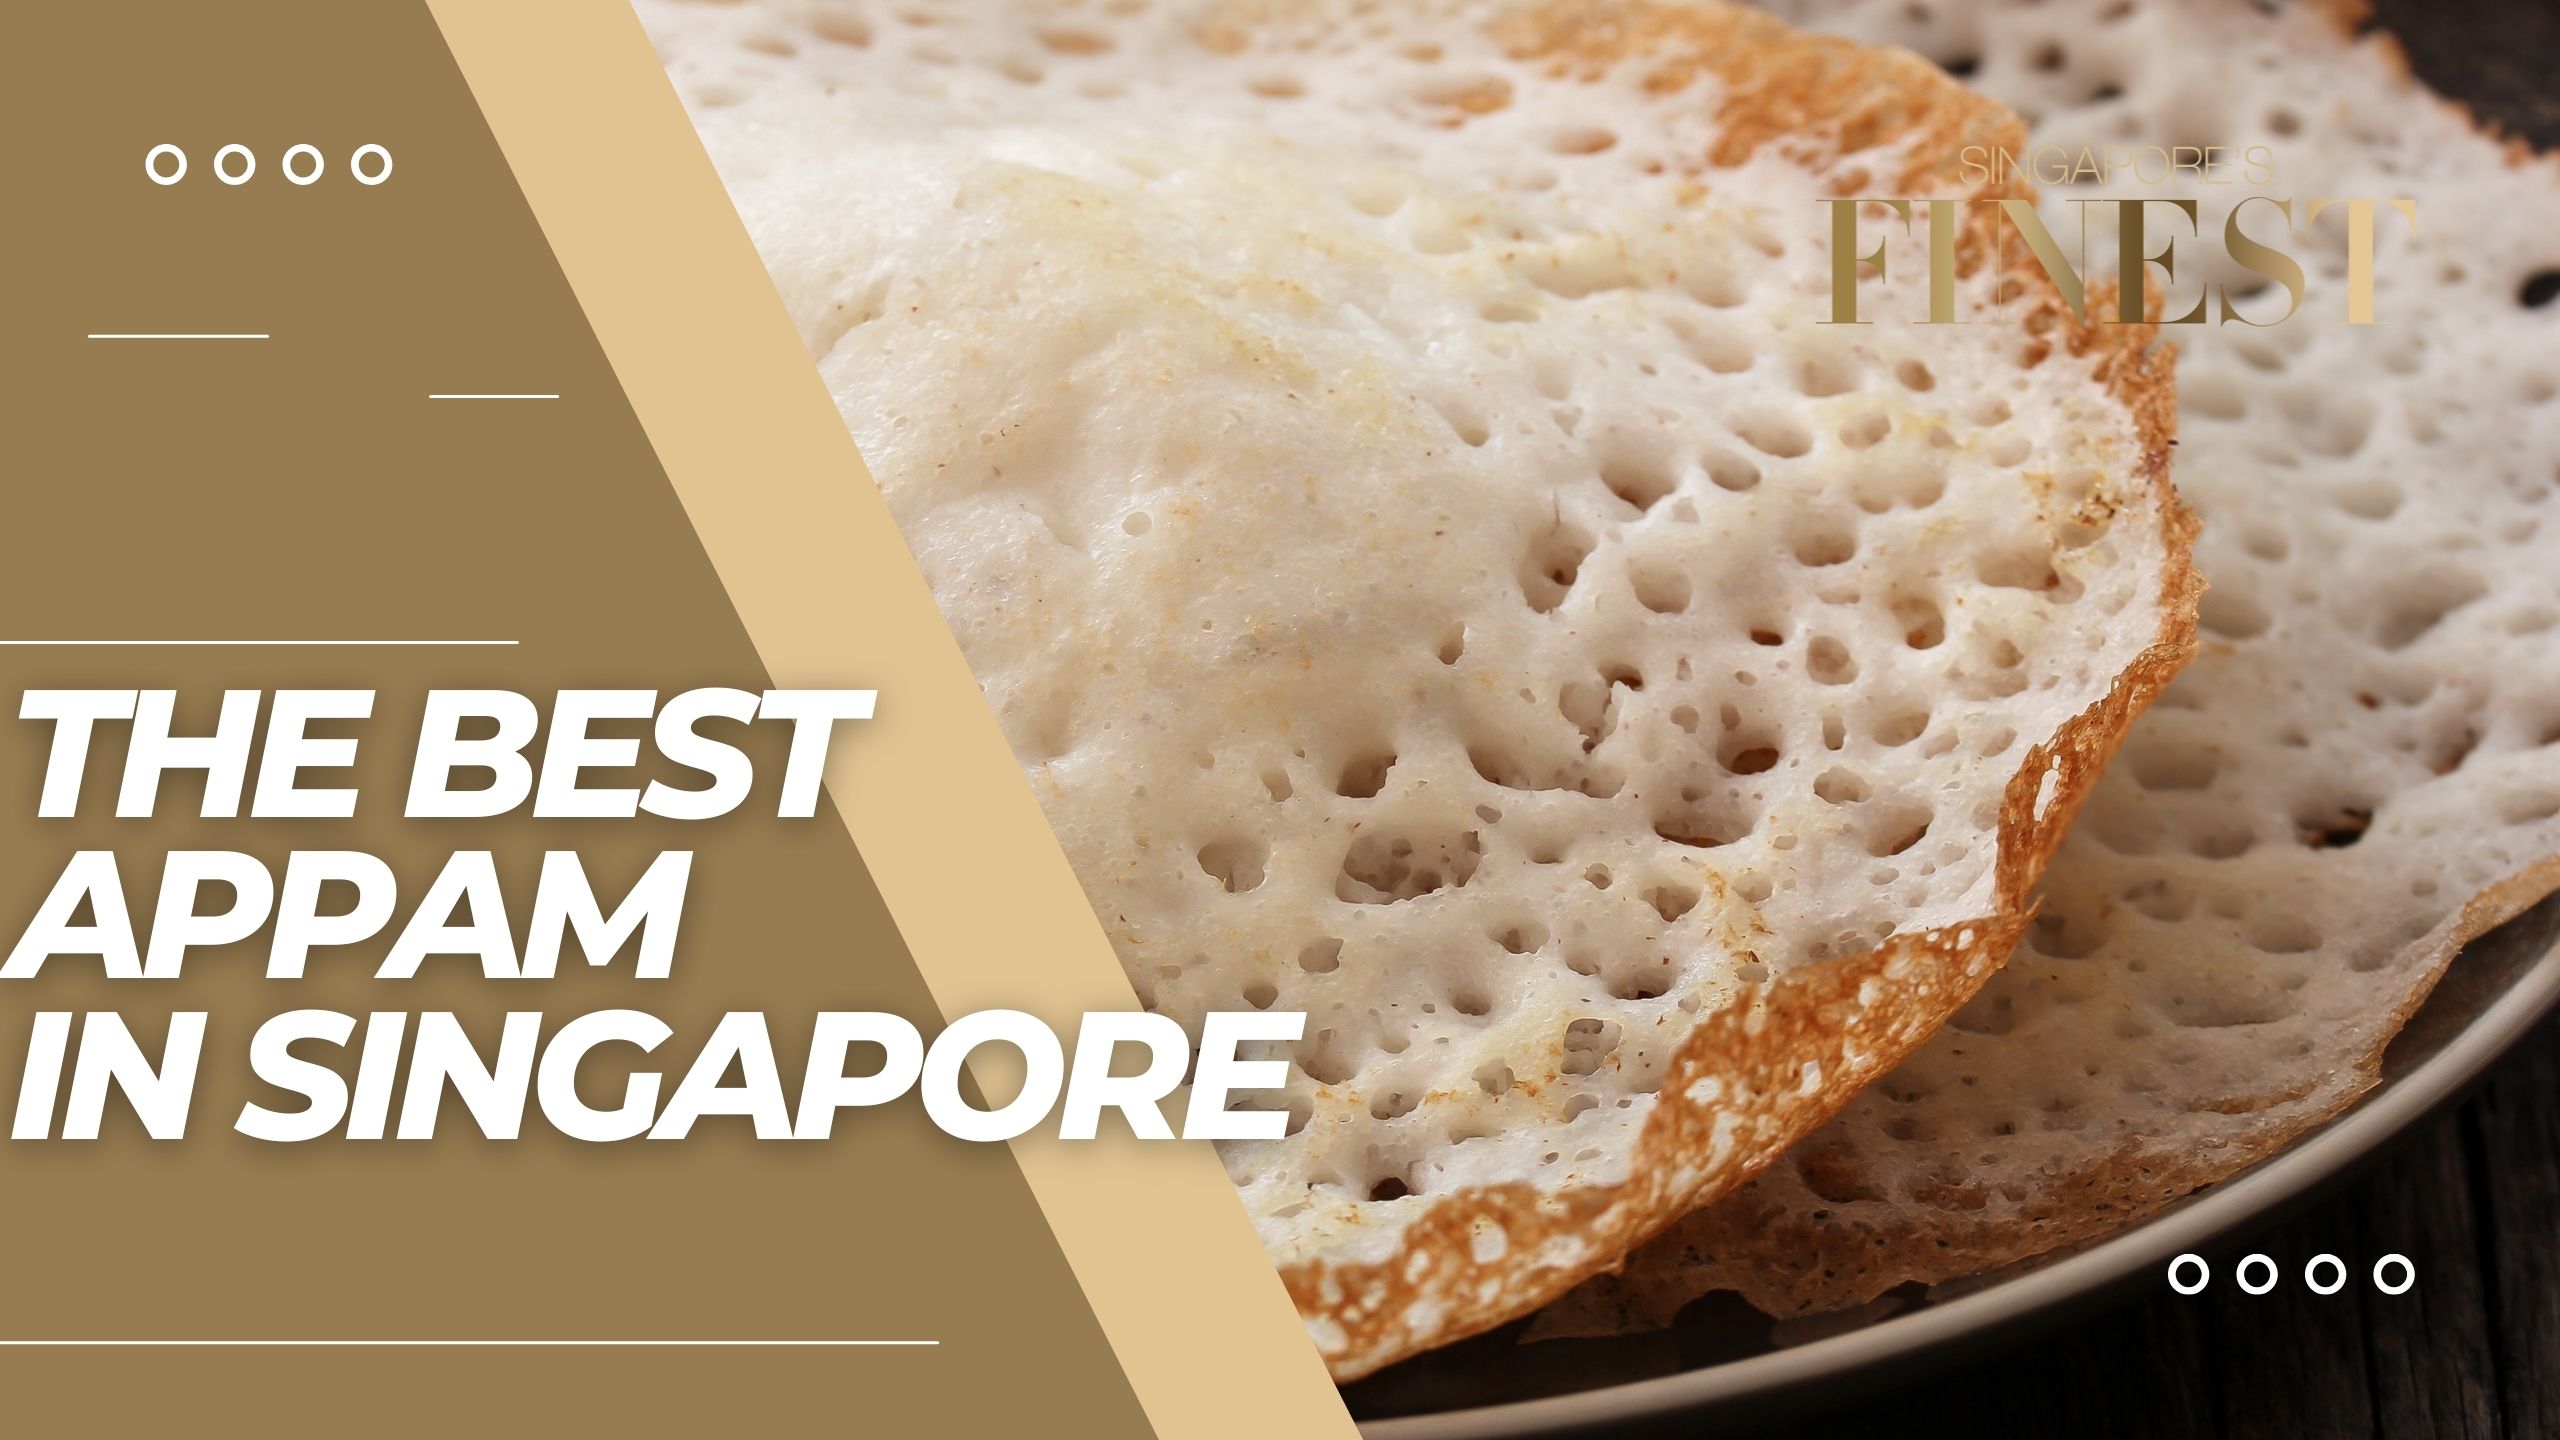 The Finest Appam in Singapore